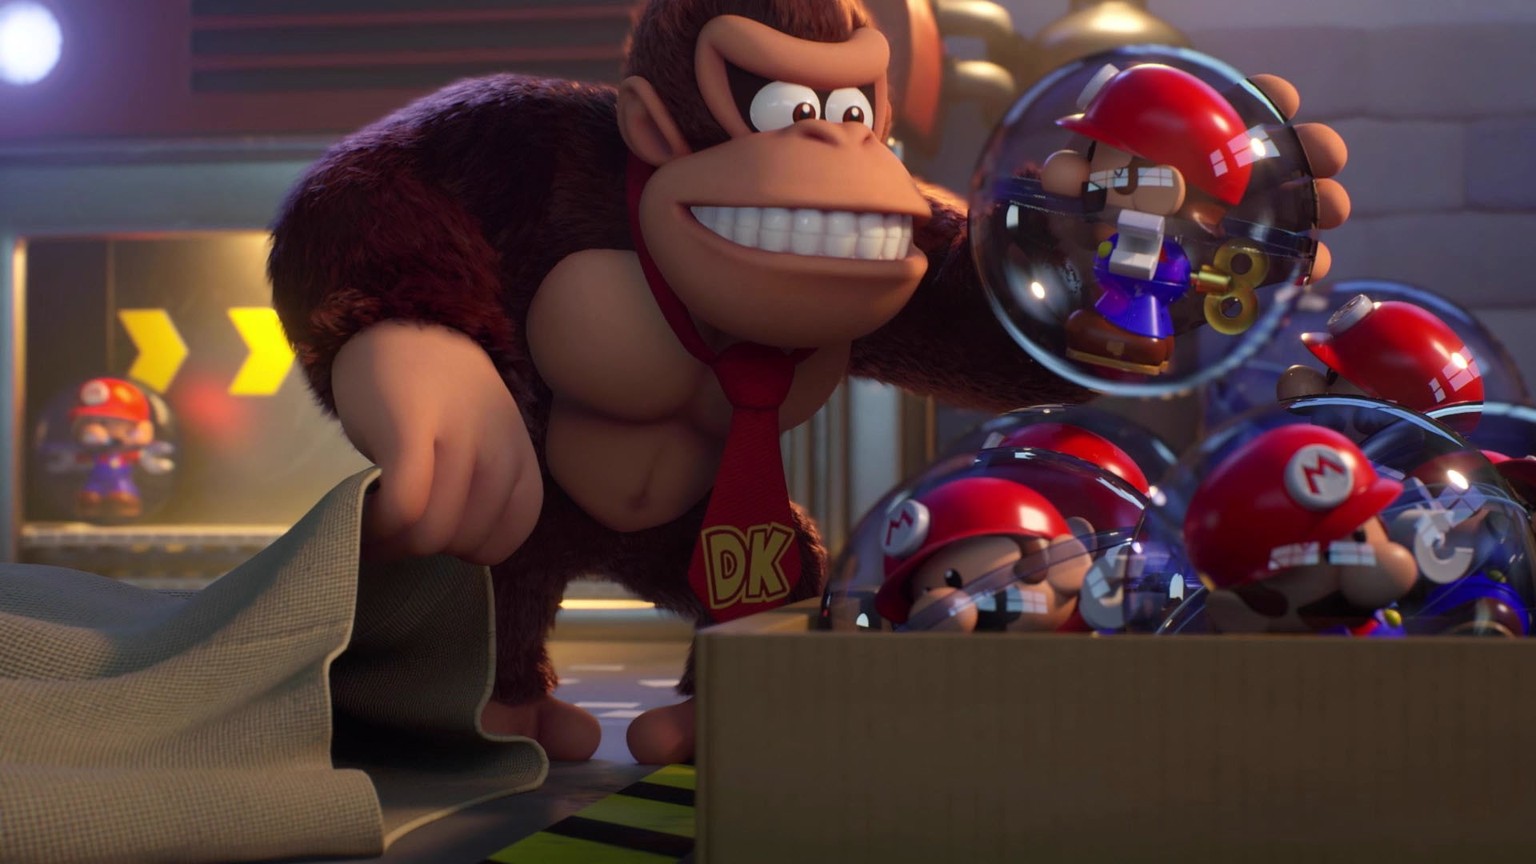 Donkey Kong greedily steals all the mini figures that fit in his sack.